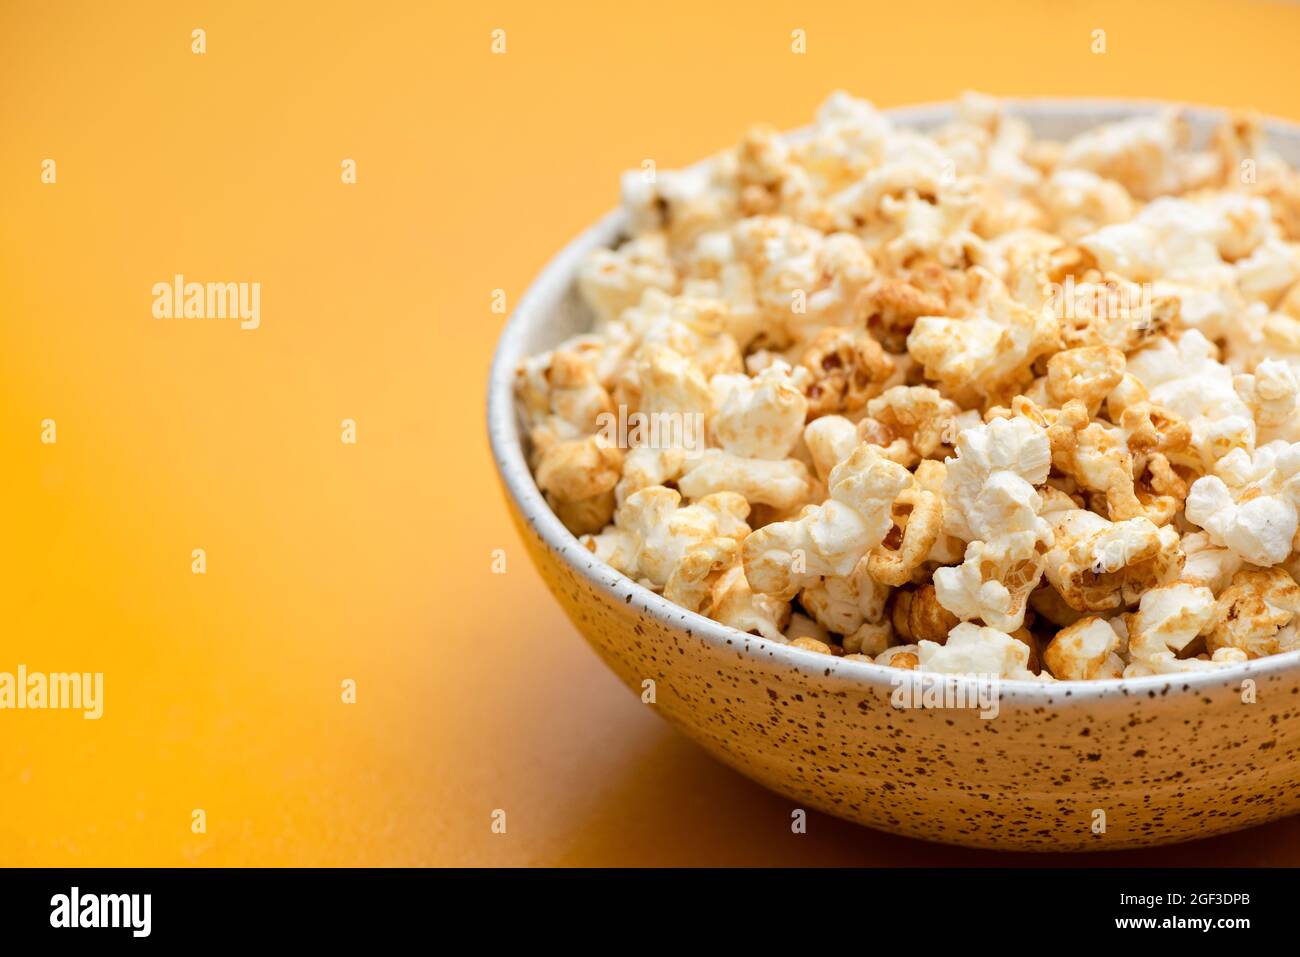 Popcorn in bowl on yellow background isolated. Closeup view, copy space Stock Photo